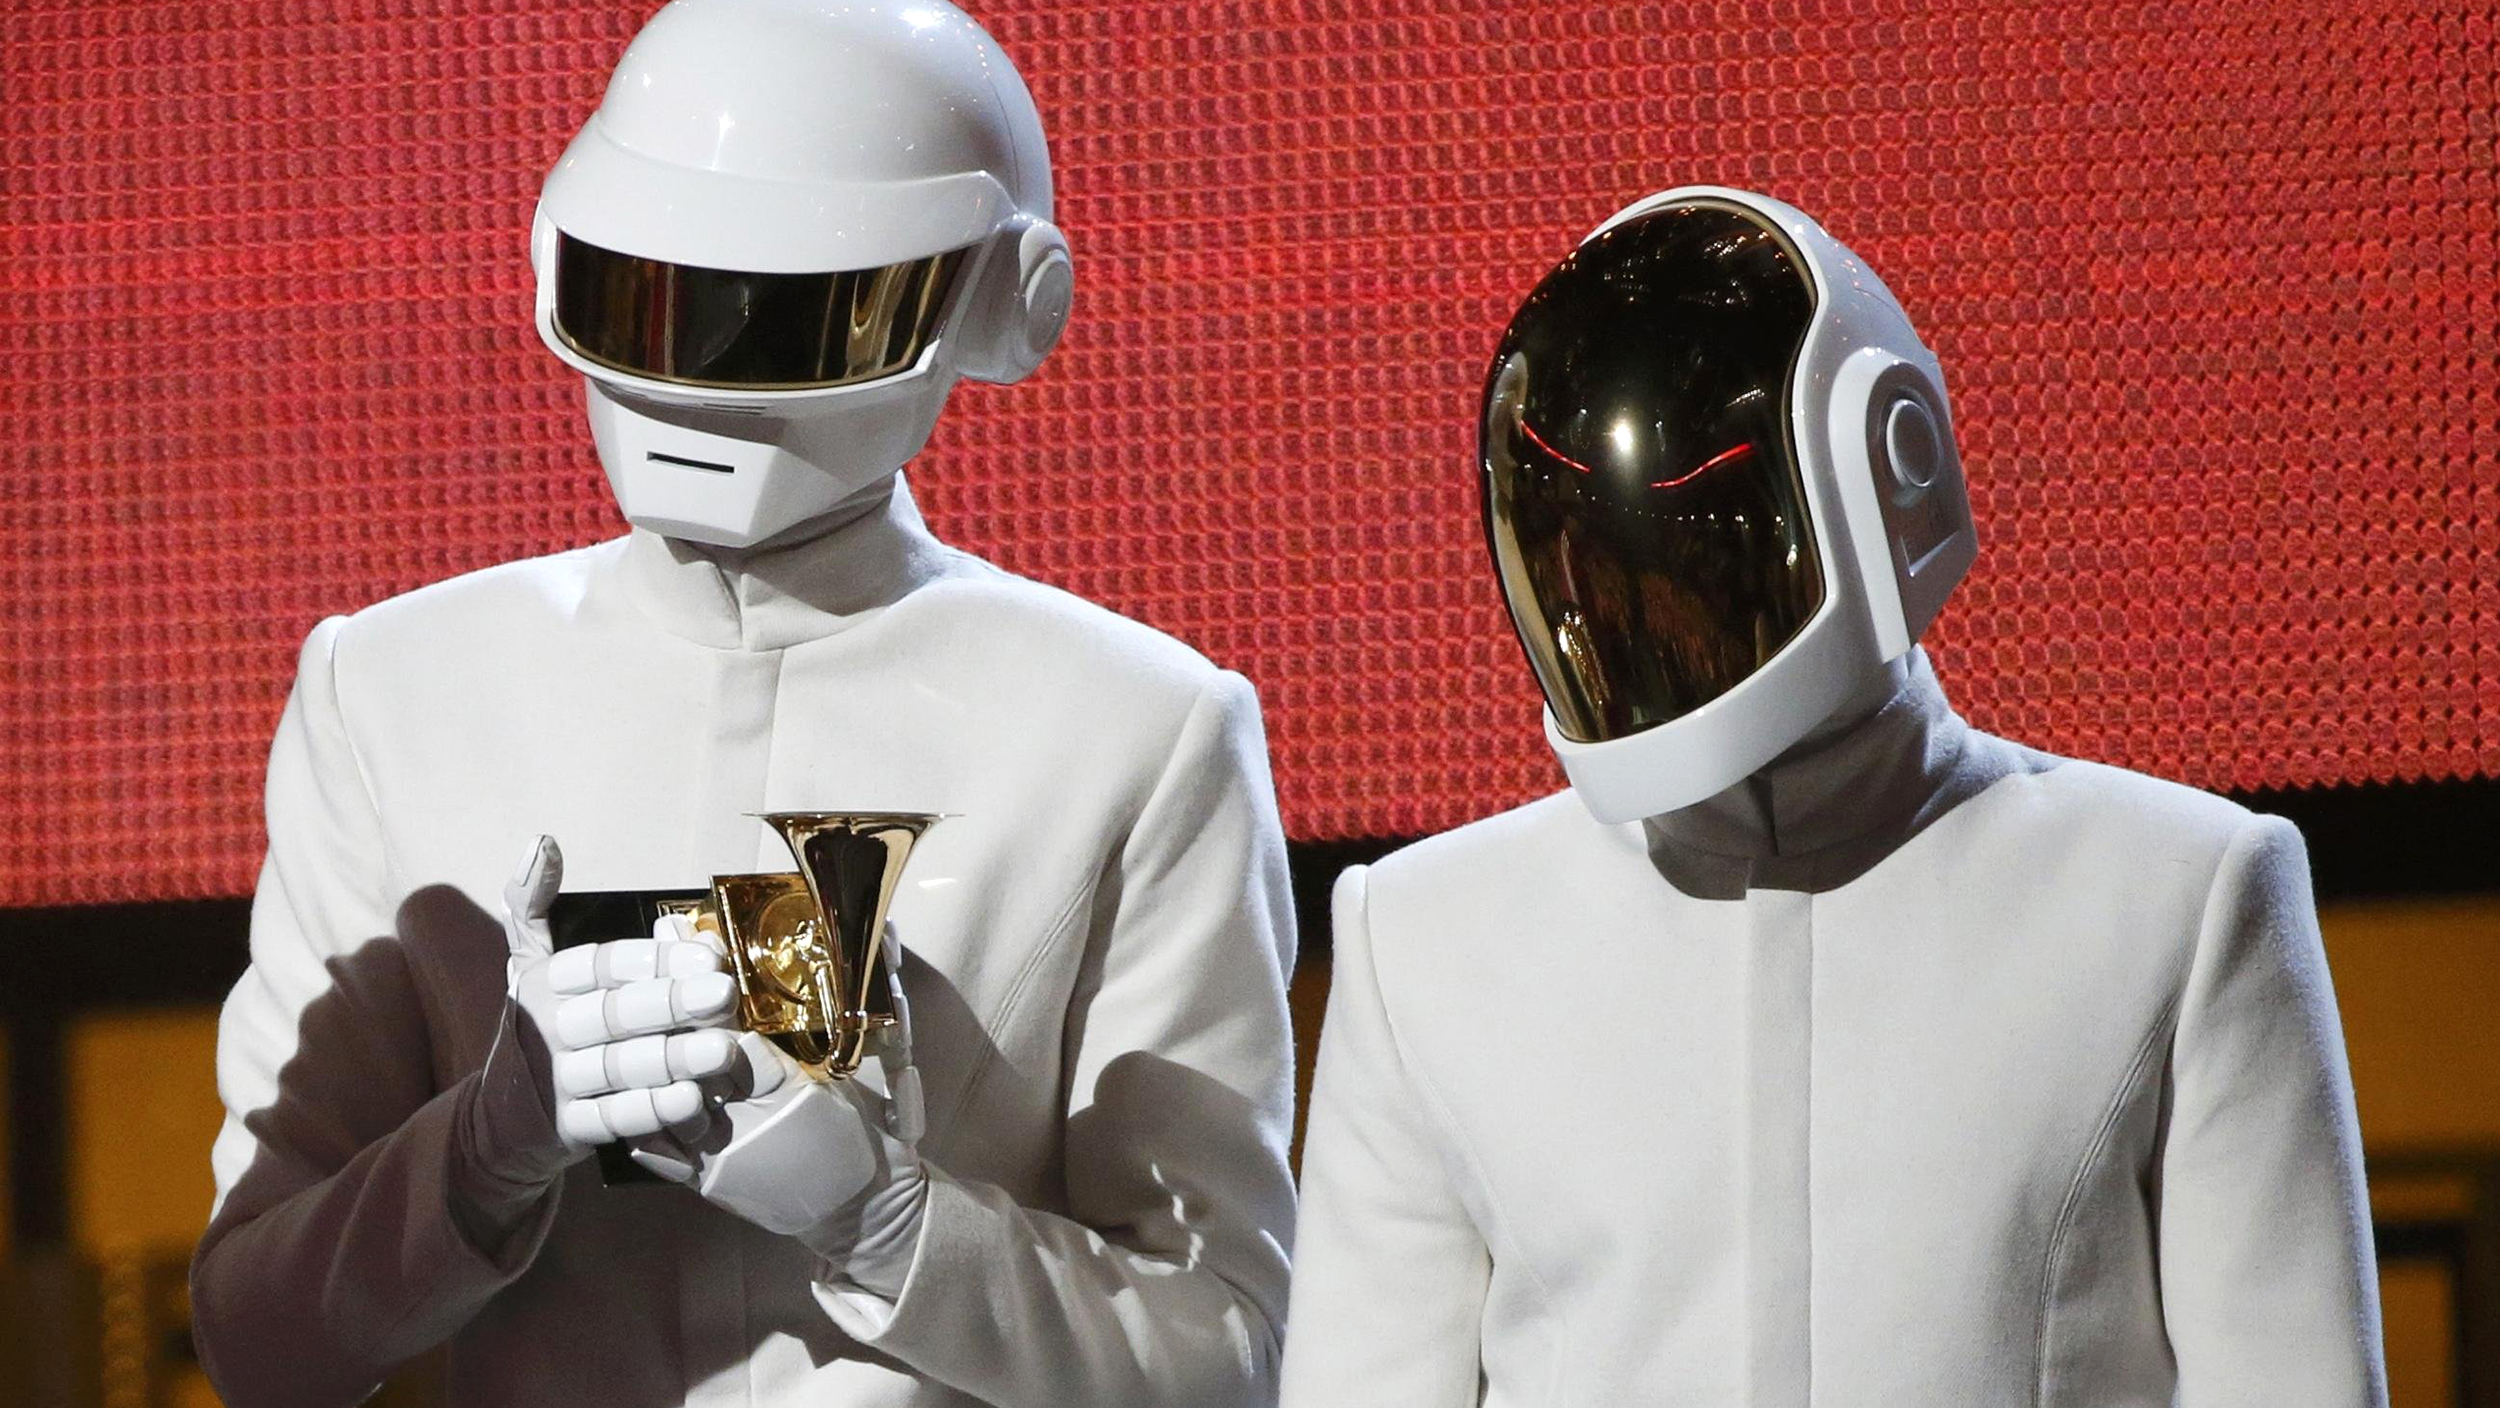 Daft Punk, Lorde win big at retro-flavored Grammy Awards - TODAY.com2500 x 1408